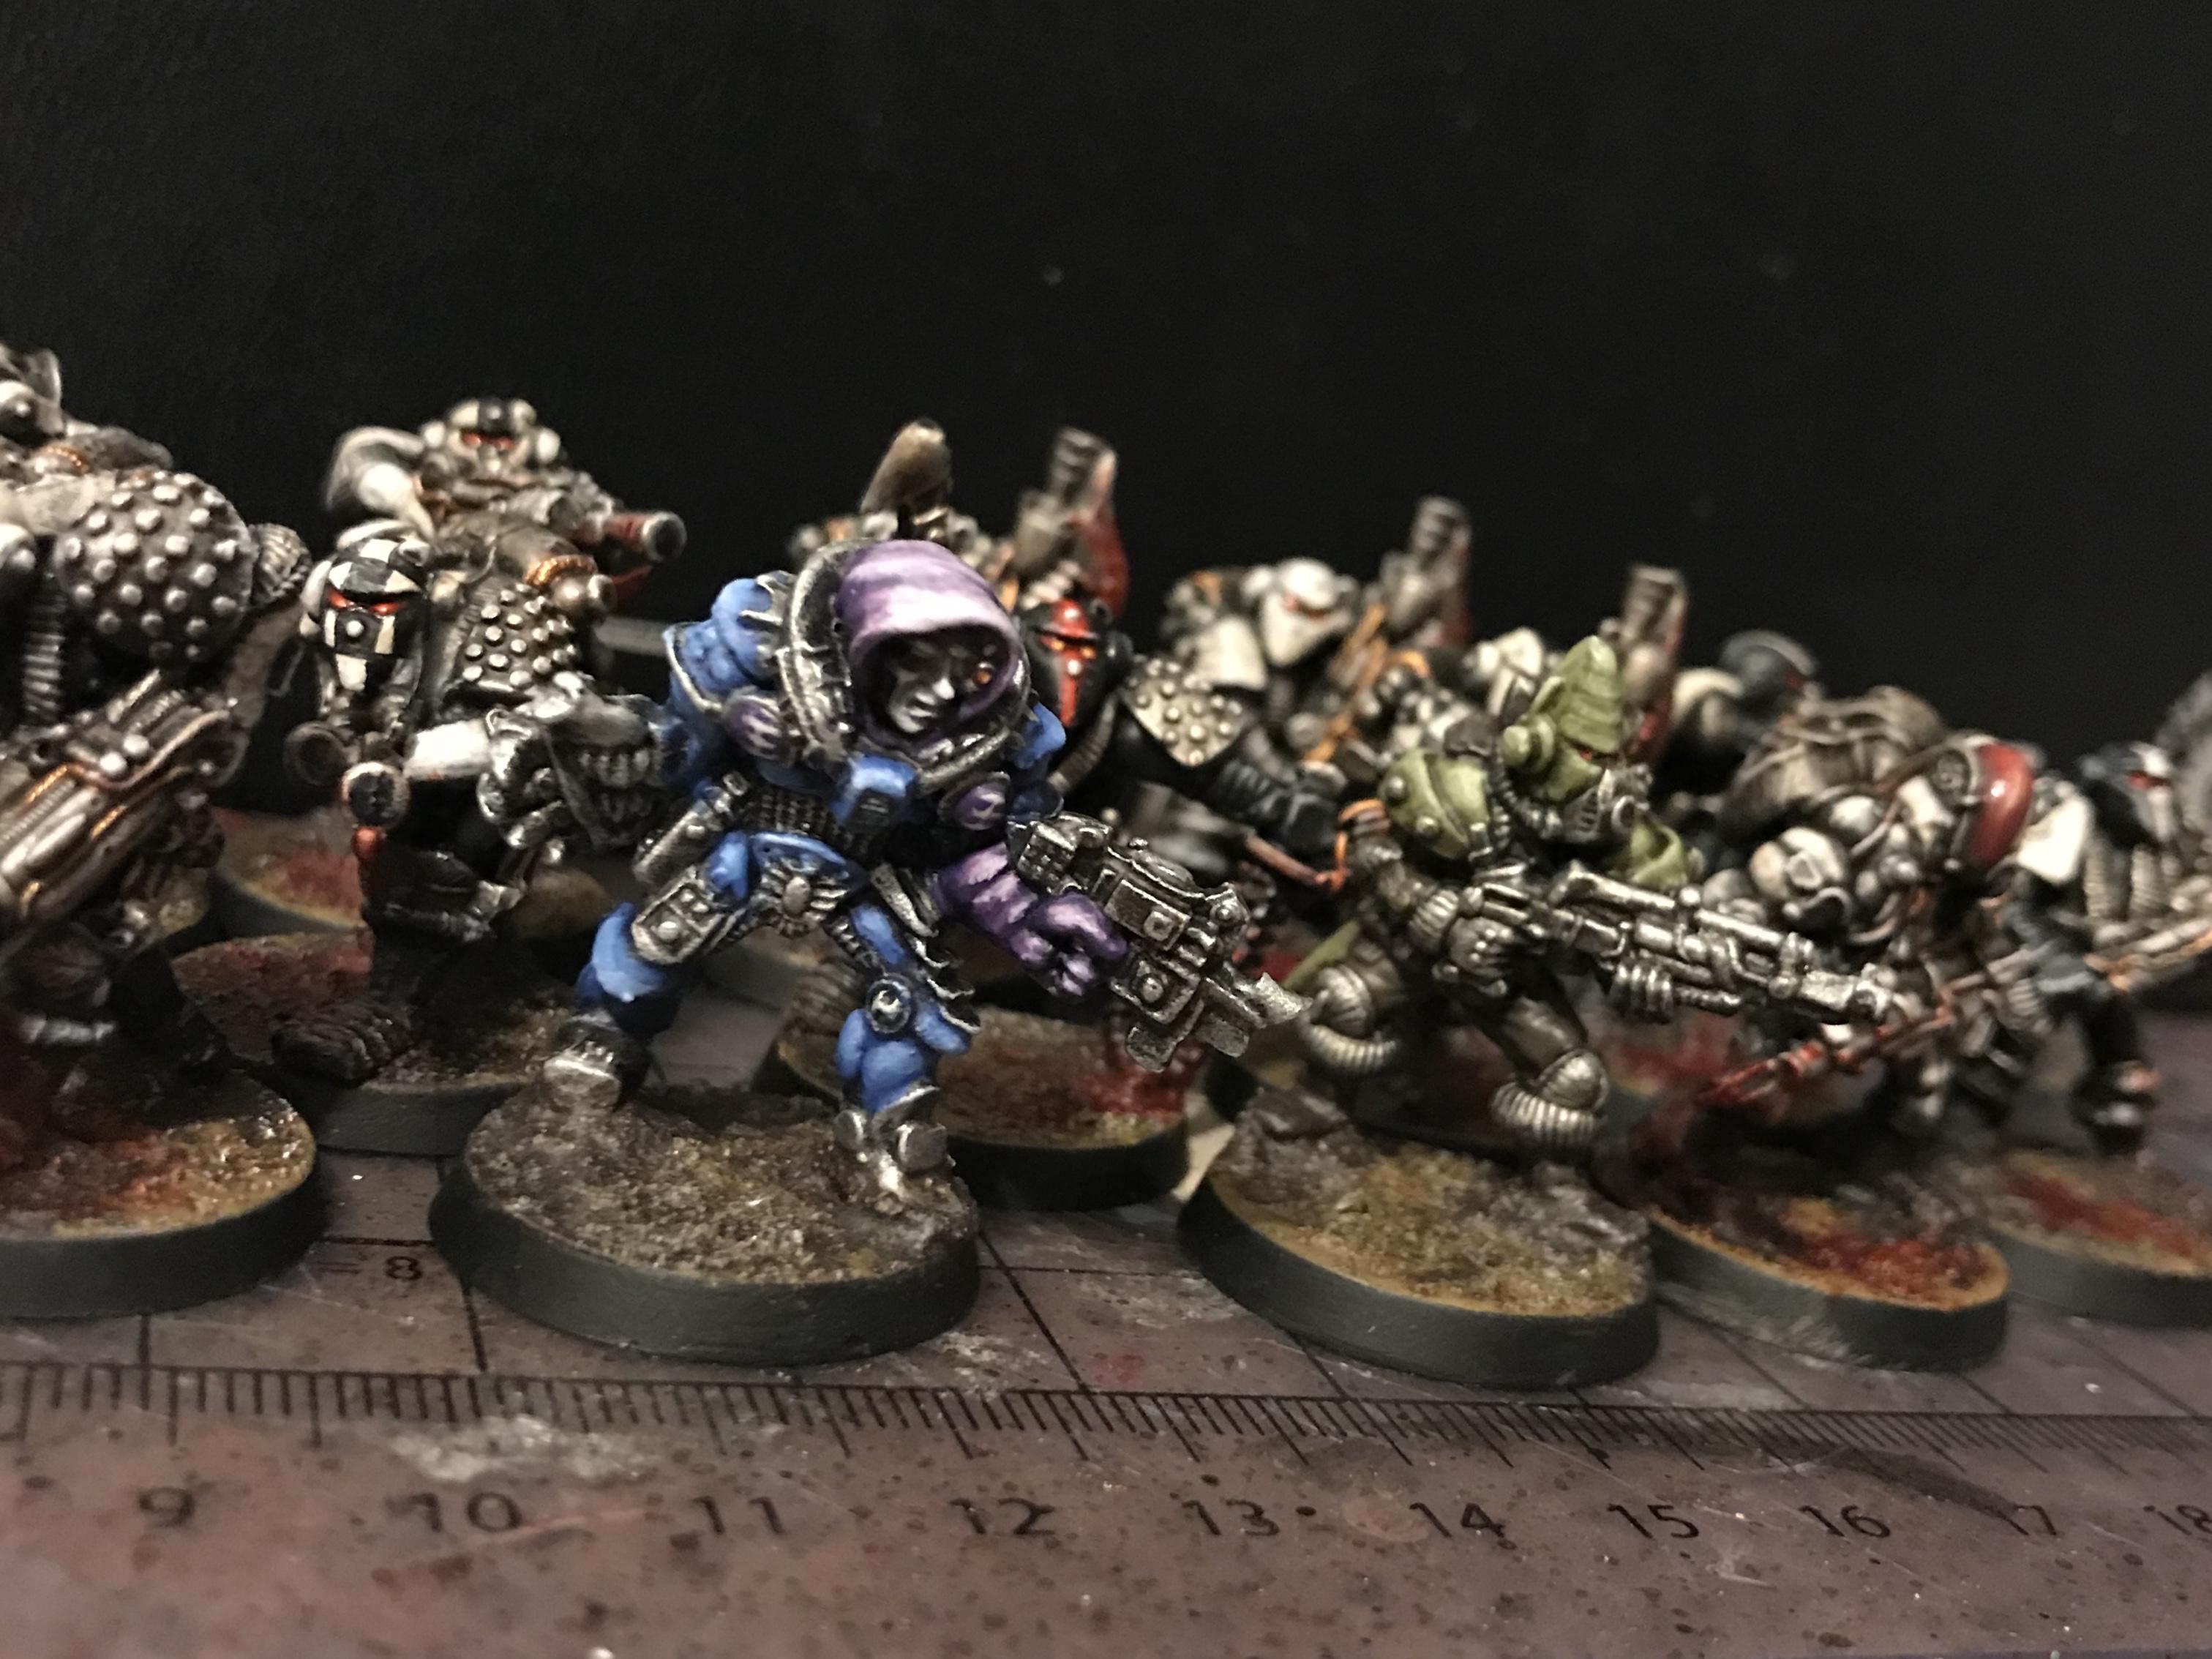 117, 2nd, 41st, Adeptus, Adventurers, And, Armor, Astartes, Badab, Battle, Black, Blade, Blue, Bolters, Boltguns, Bounty, Brother, Brothers, Brutal, C100, Captain, Chaos, Chaotic, Chapter, Chapters, Combi, Combi-bolter, Combi-disintegrator, Combi-weapon, Corsairs, Daemonhunter, Damned, Dark, Darkness, Deep, Demonhunter, Disintegrator, Eye, Far, Fj, Founding, Future, Gate, God, Gods, Grim, Heavy, Heresy, Hobby, Horus, Human, Humans, Hunter, Imperial, Imperium, Inquisition, Inquisitor, Kaos, Kill, Legionaries, Legionnaire, Lord, Lost, Malal, Malice, Malleus, Man, Mankind, Millennium, Of, Oldhammer, Ordo, Ordos, Painted, Pirate, Pirates, Power, Power Armor, Power Armored, Powers, Psionic, Psyker, Purple, Pyro, Pyromaniac, Radical, Raiders, Rakkir, Realms, Recon, Red, Reference, Renegade, Renegades, Retro, Rogue, Ruinous, Runner, Second, Shadow, Slaves, Soldier, Space, Space Marines, Spartan, Spider, Spiders, Squad, Successor, Survivors, Sylo, Tannh&auml;user, Tannhauser, Team, Teams, Terror, To, Trader, Traders, Traitor, Trooper, Troopers, Troops, Unit, Ventolin, Veteran, Void, War, Warhammer 40,000, Warhammer Fantasy, Warp, Weapon, White, Widow, Xuren